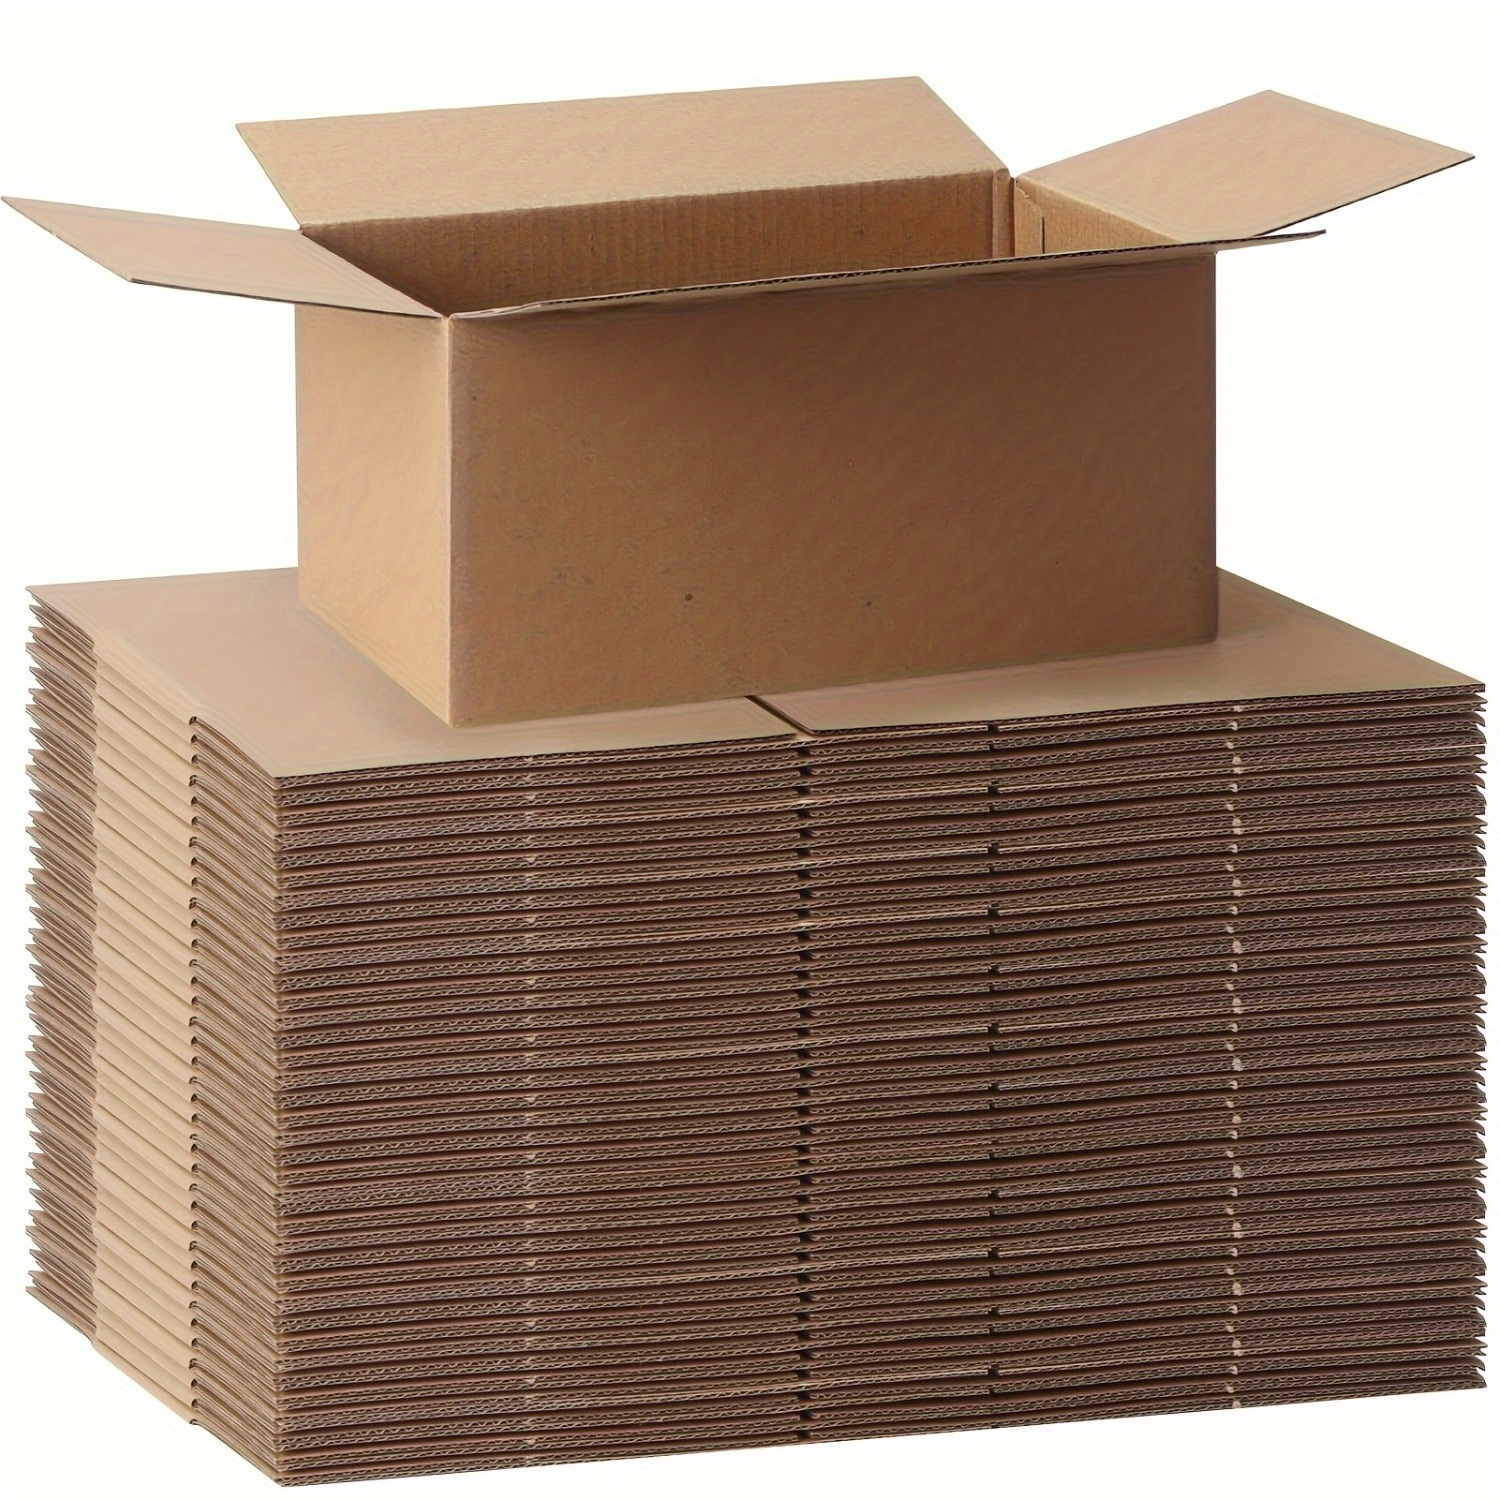 

5/10pcs, 8*5*4inch Small Business Shipping Box, Cardboard Corrugated Mailing Packaging Box